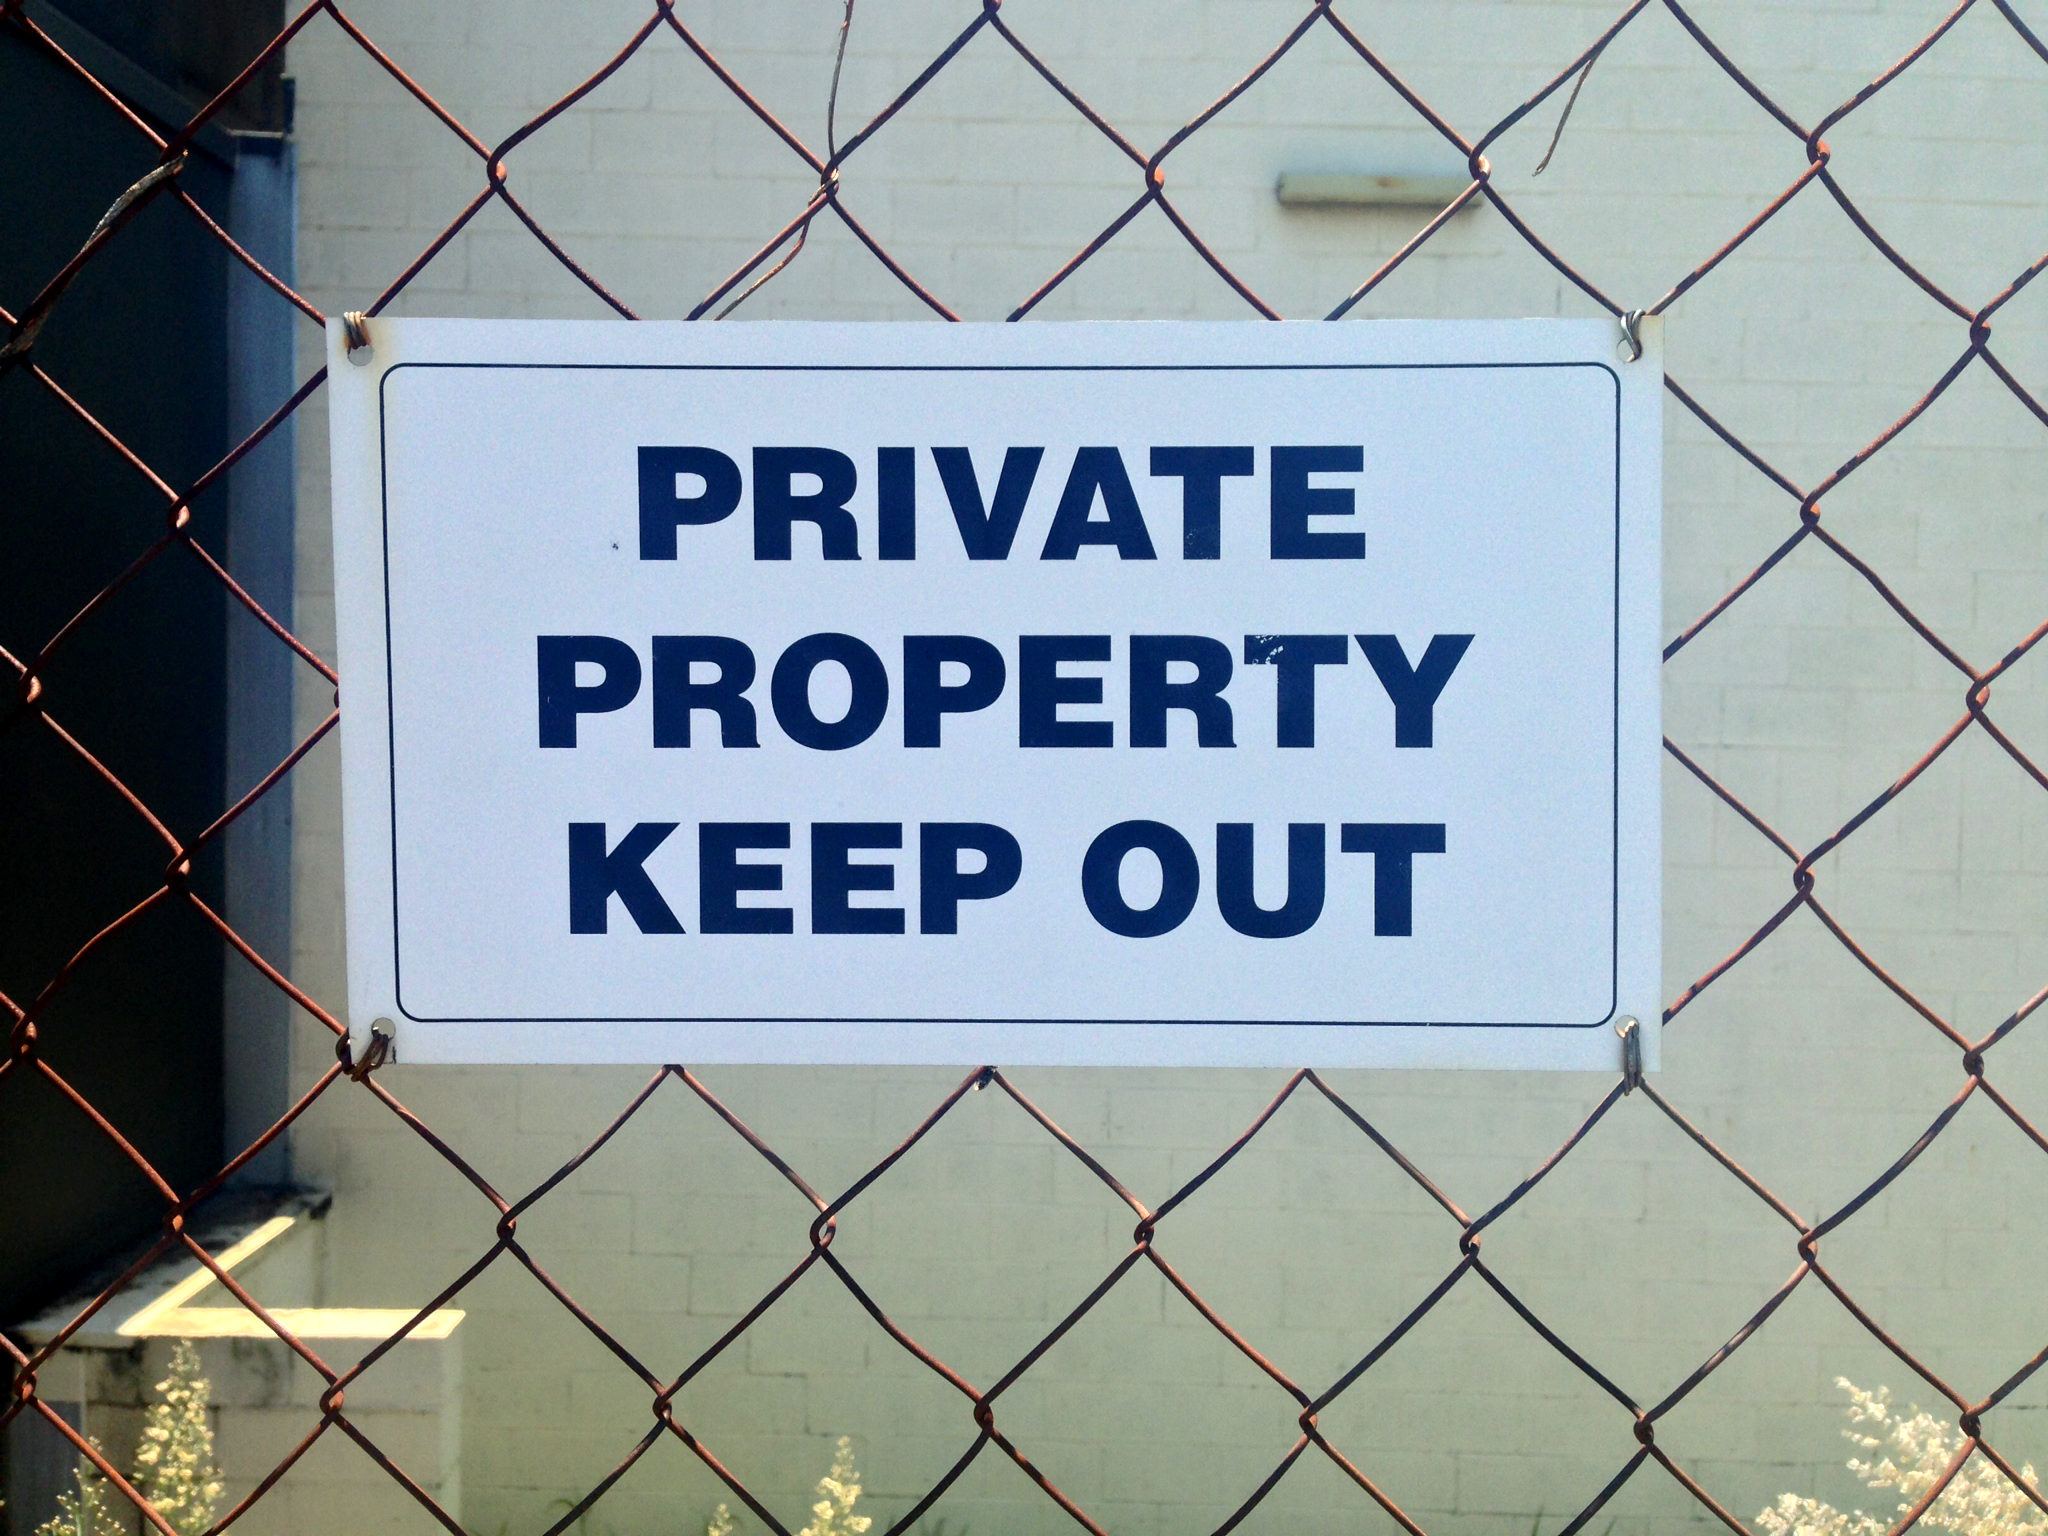 Private property keep out sign photo